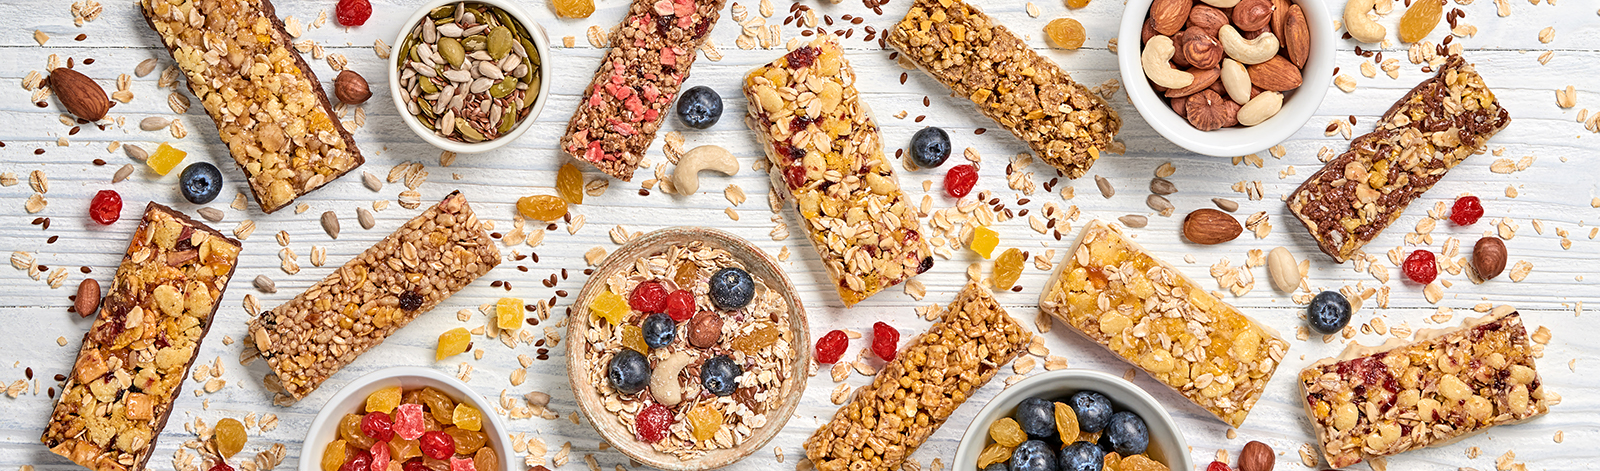 Nutrition granola bars with nuts, dried fruits, and berries